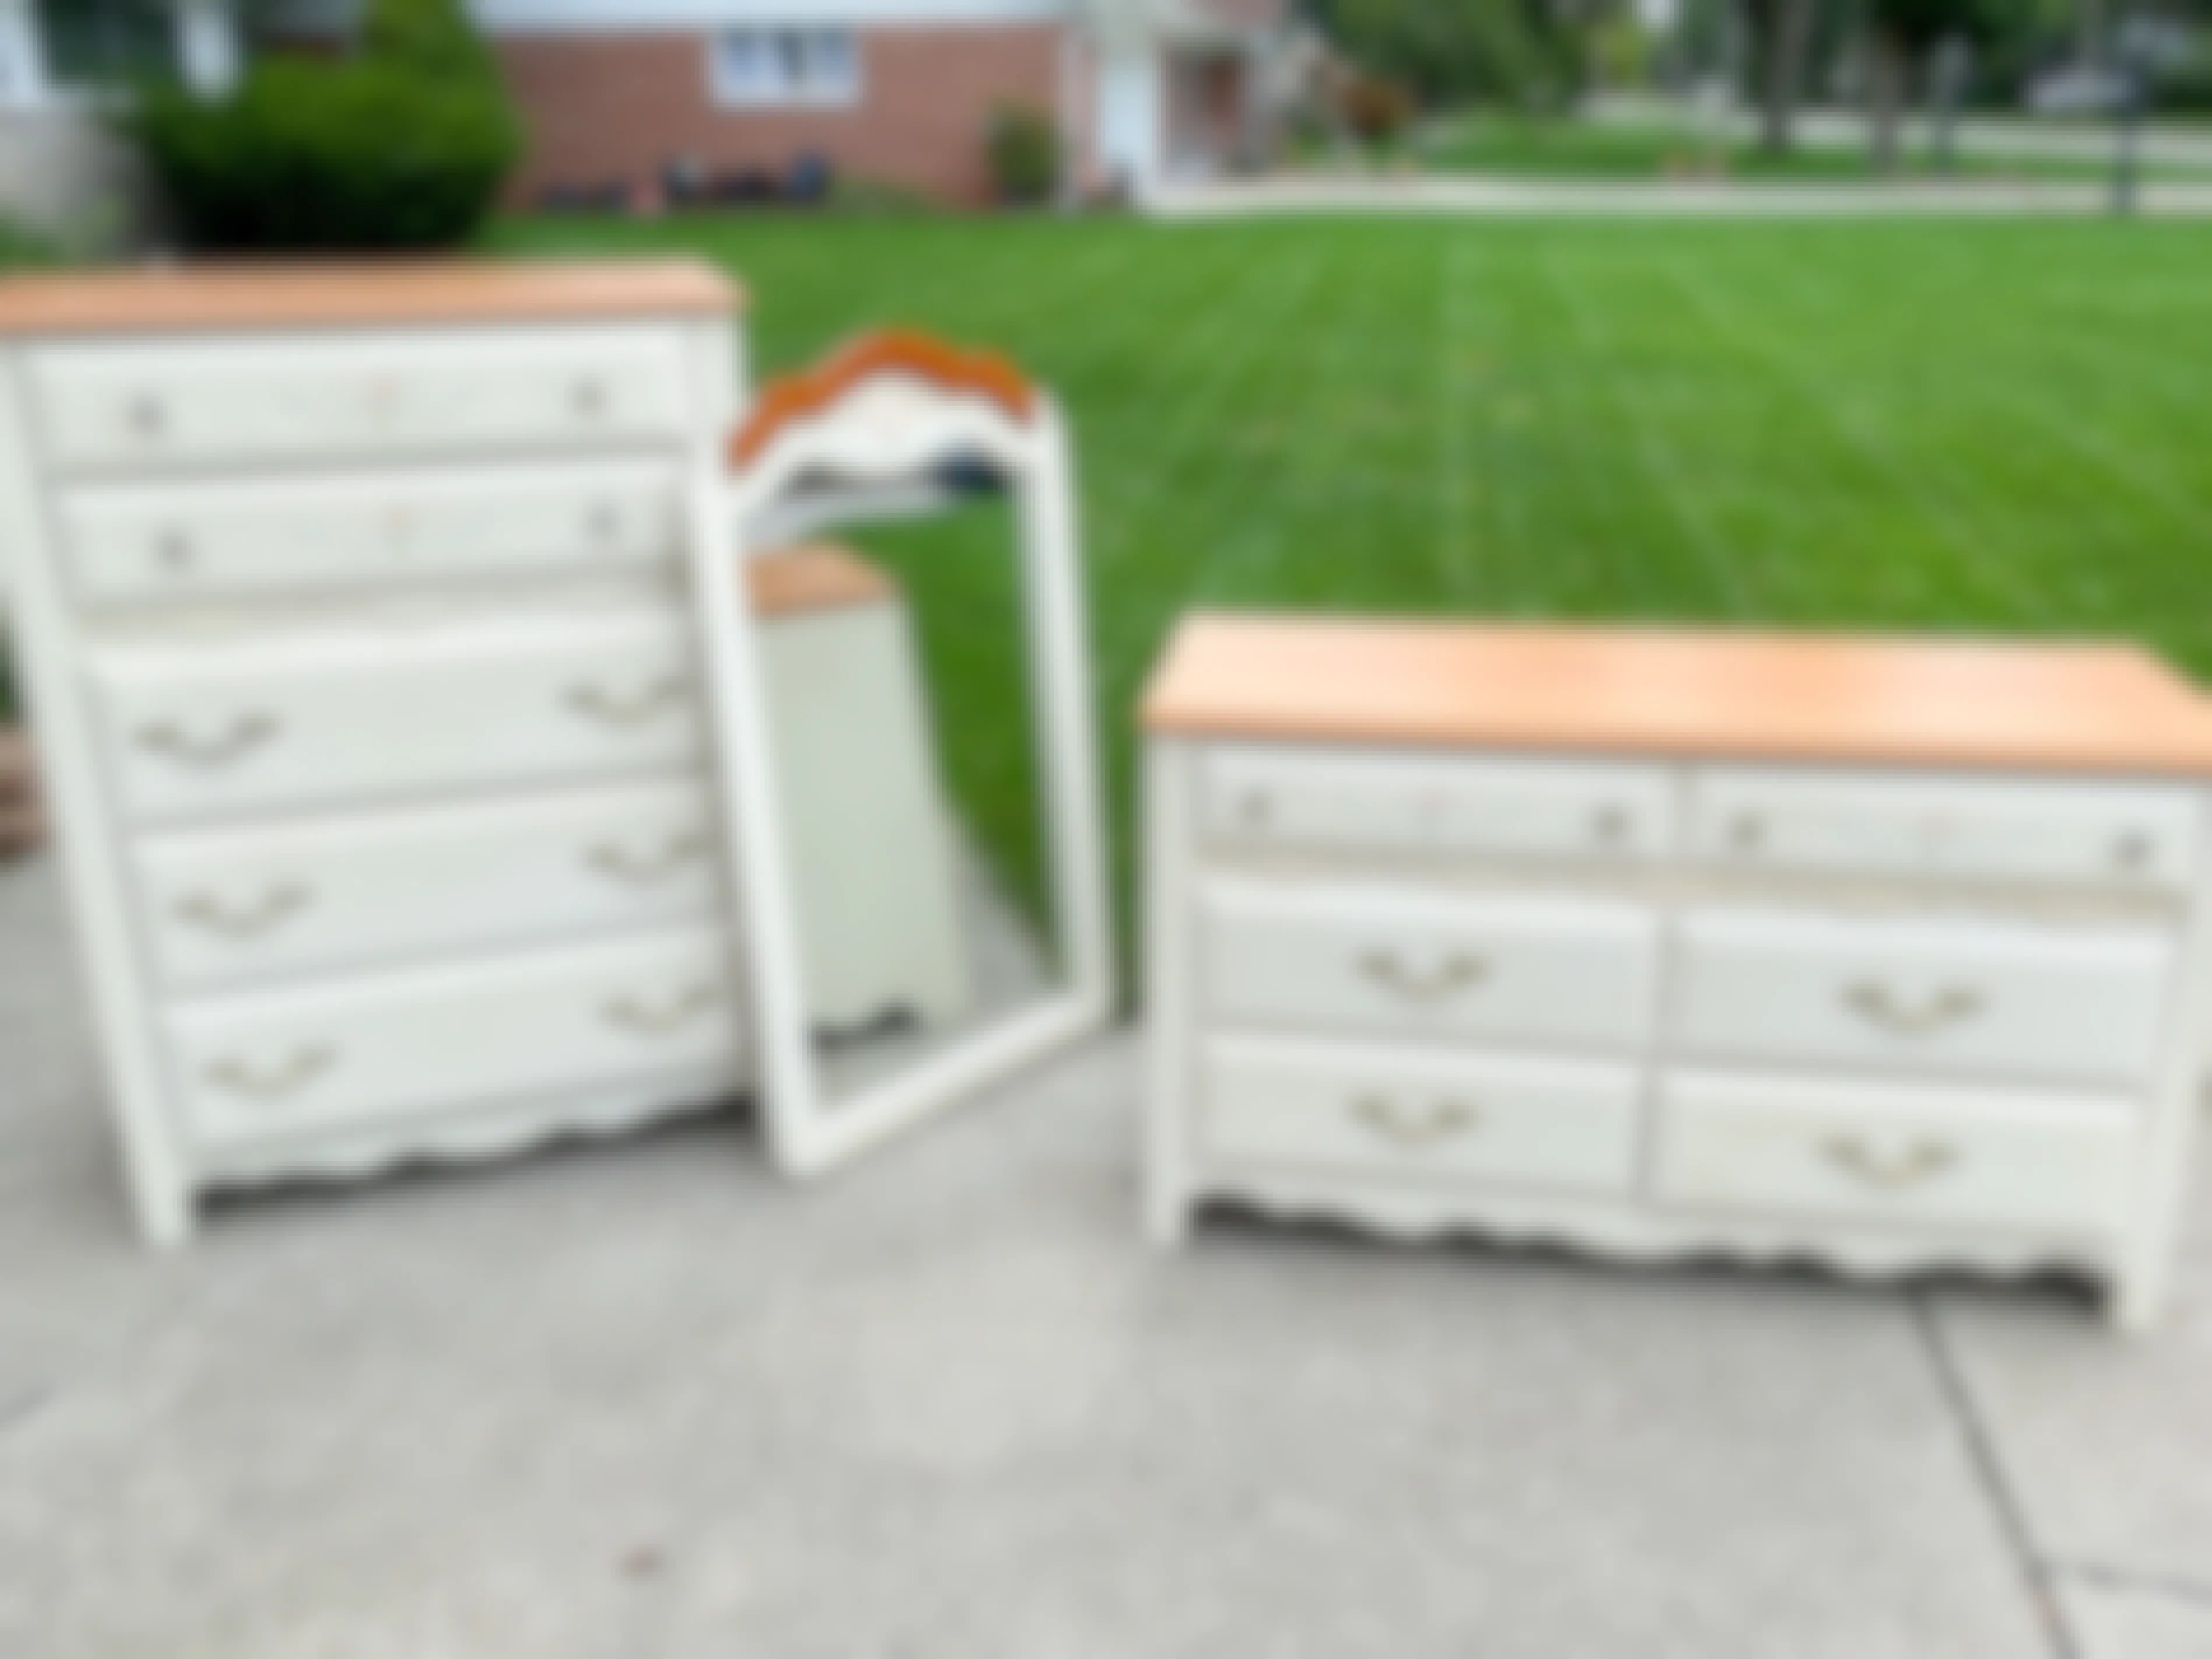 Some furniture for sale at a garage sale